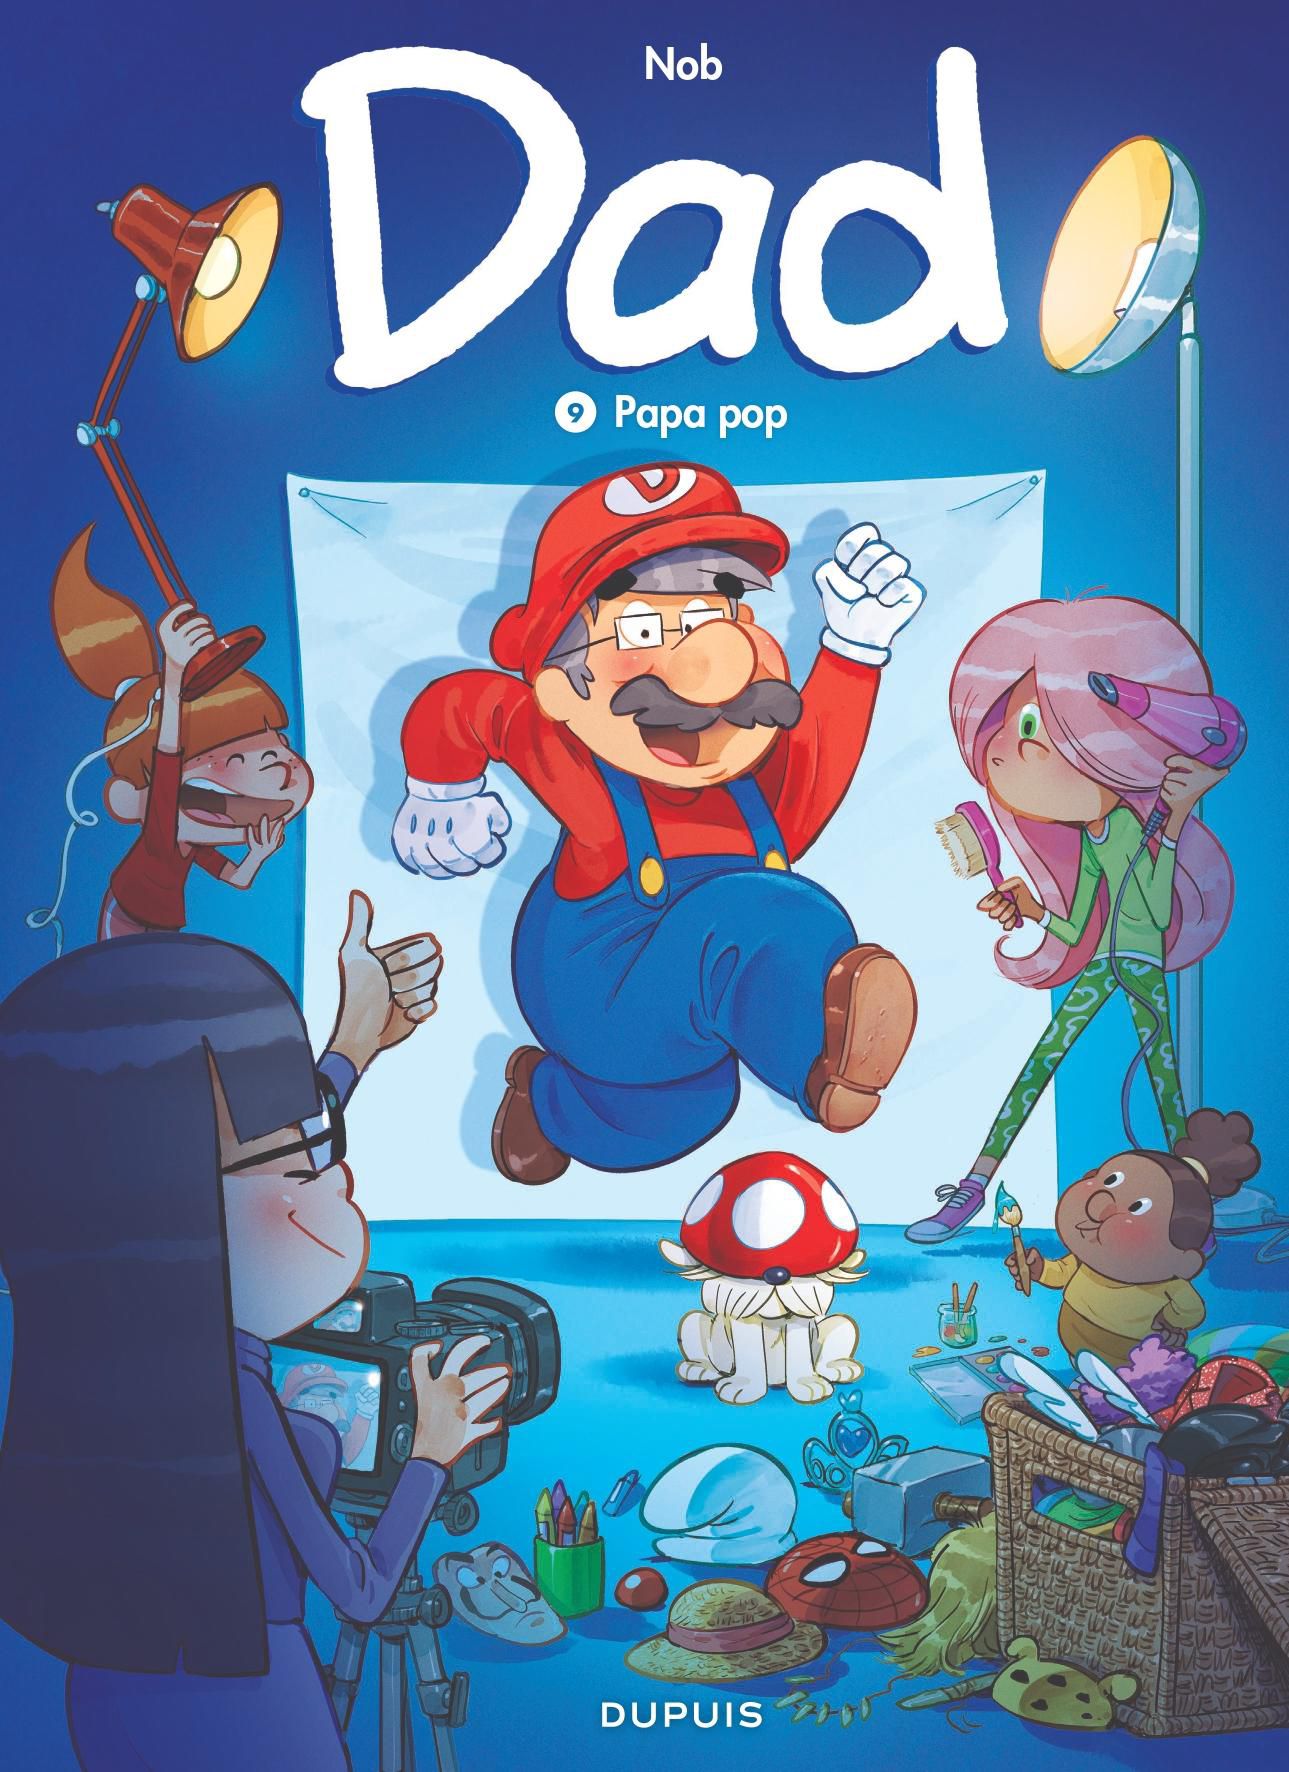 One of the eight covers of the new “Dad”: the papa poule is dressed up as Super Mario.